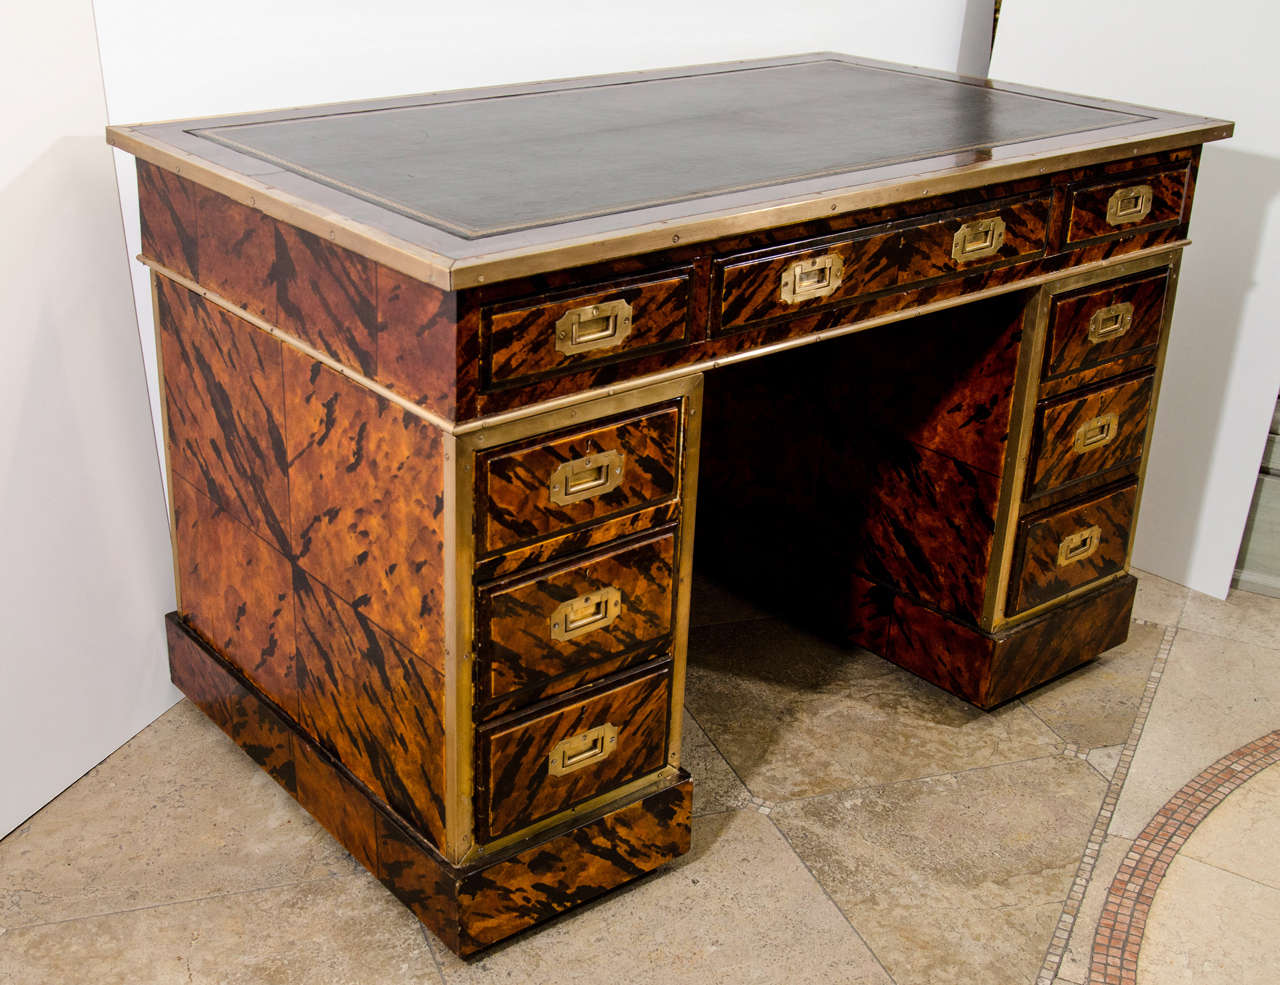 An unusual English campaign form leather top desk with brass trim and mounts and decorated with faux tortoise shell on a square plinth base.